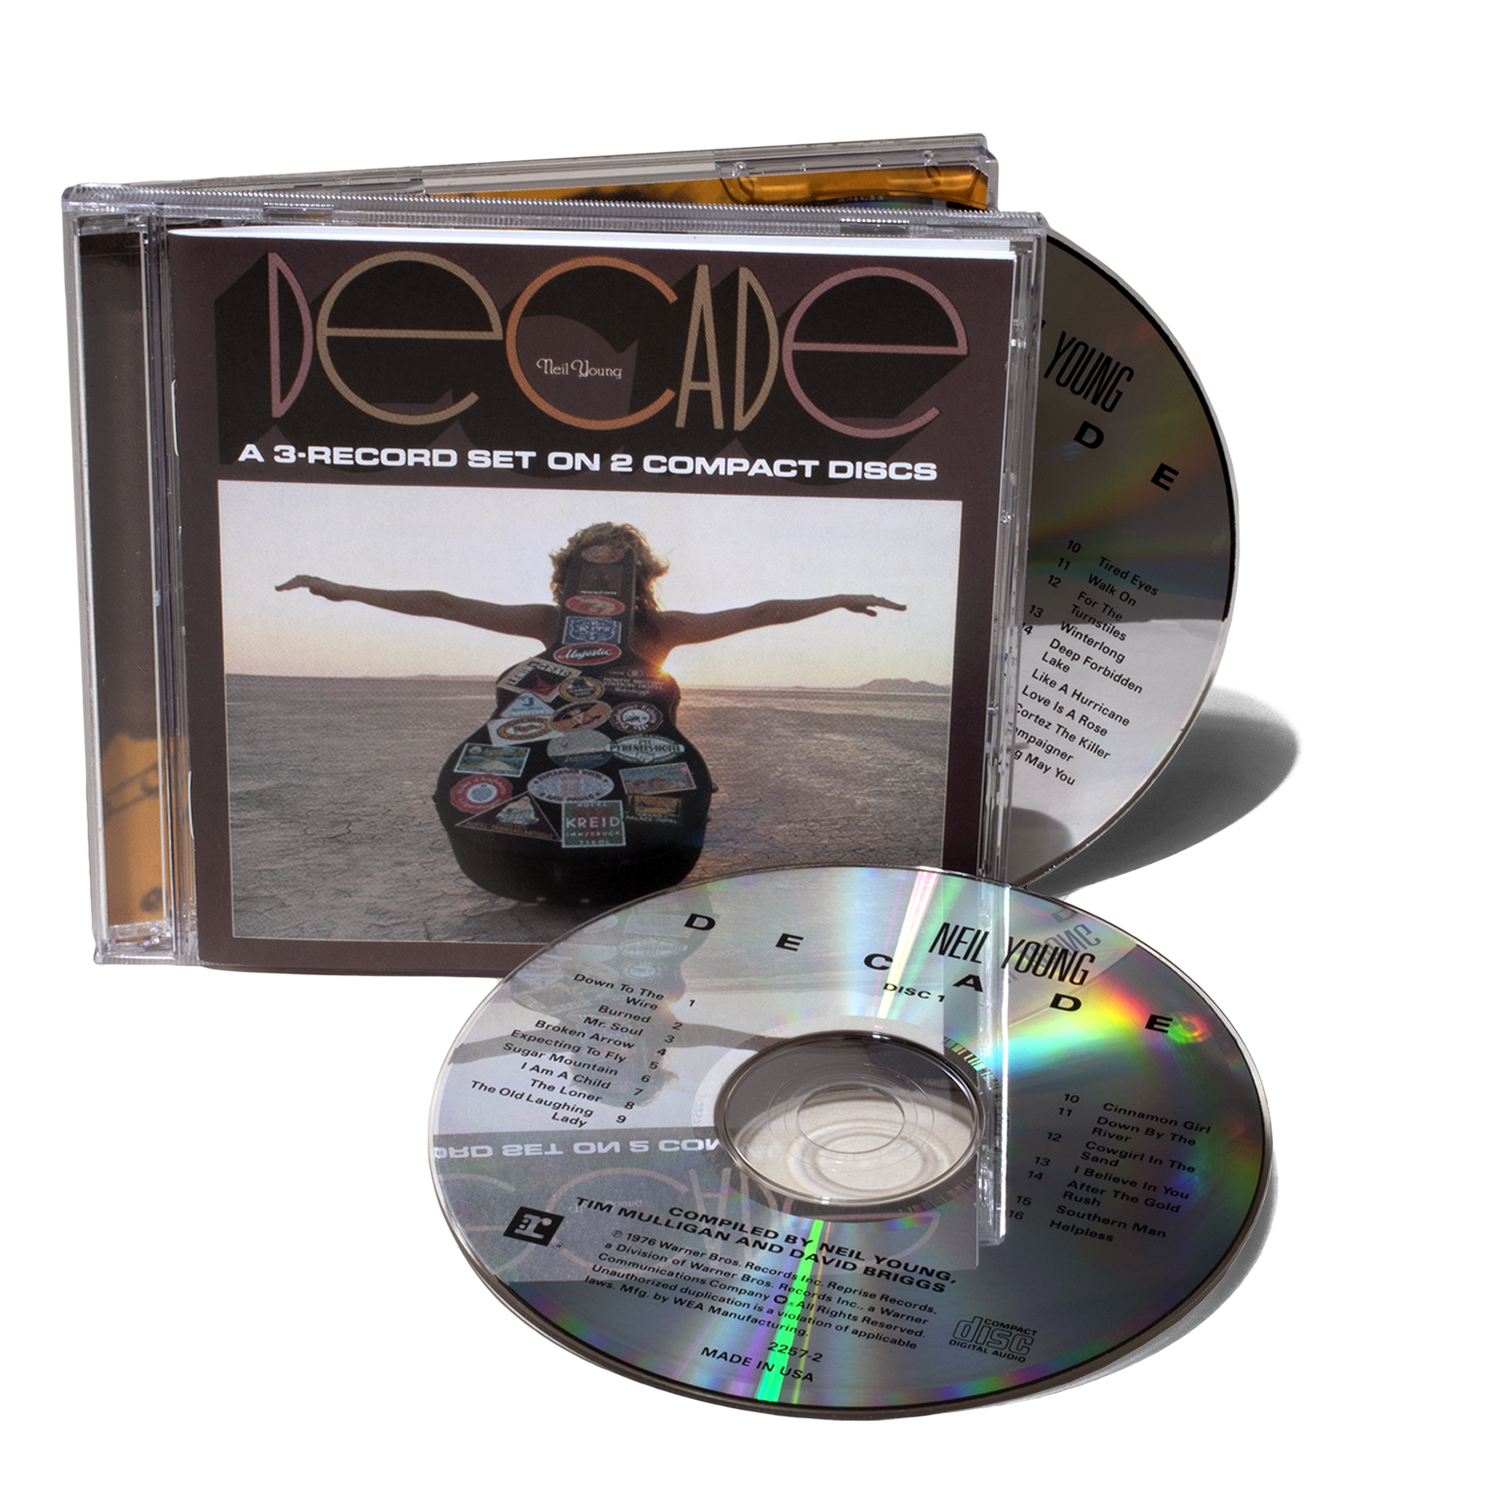 Store　Neil　Decade　(2CD)　Official　Young　US